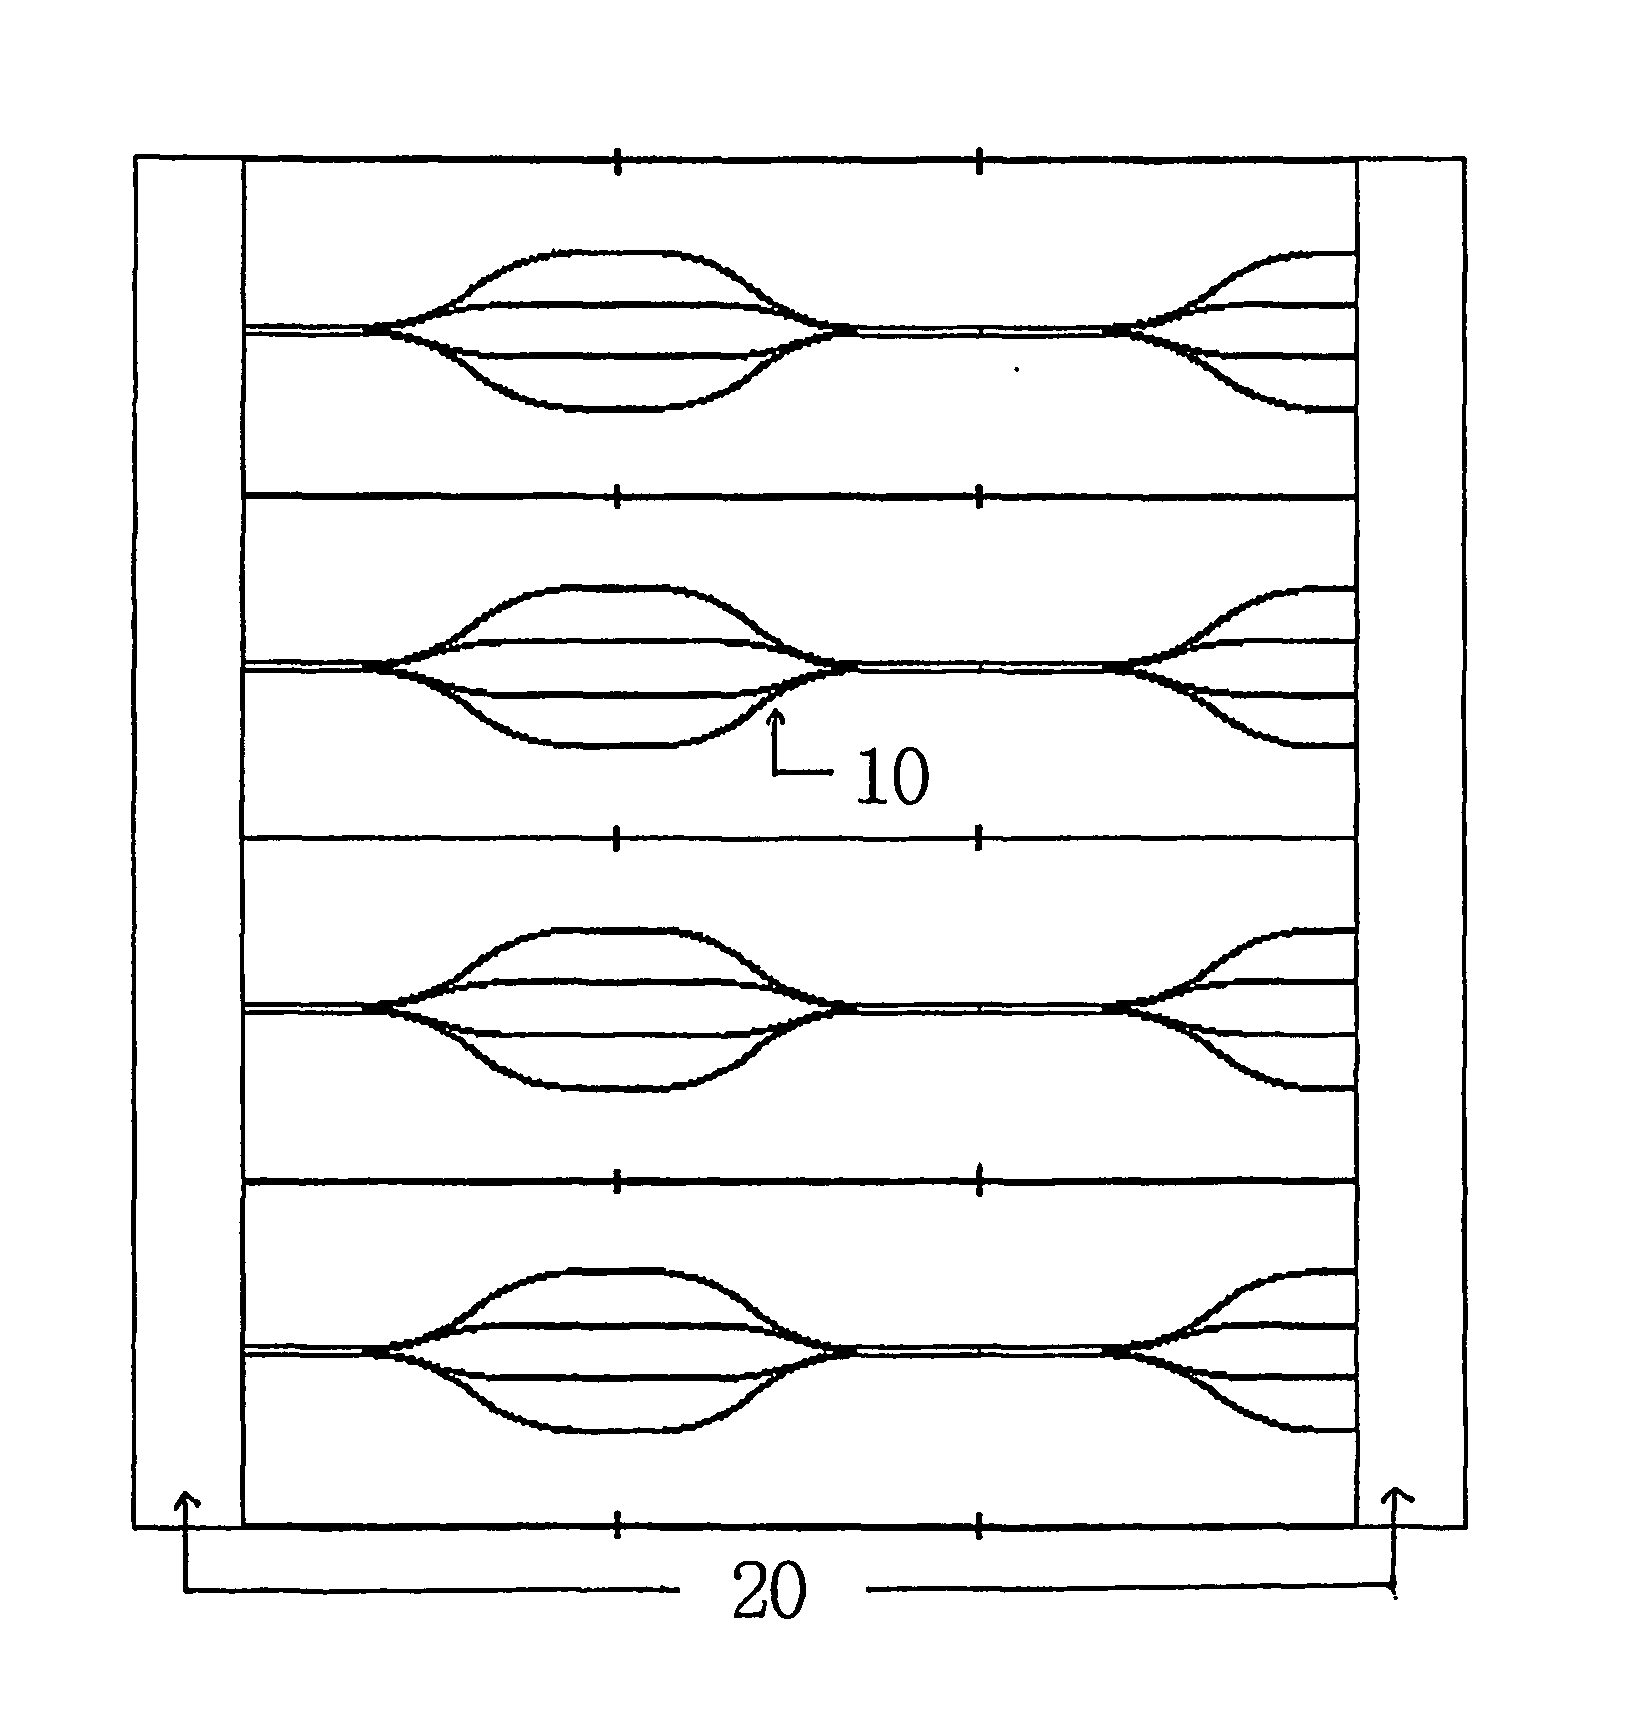 Fabrication of polymer waveguide using a mold